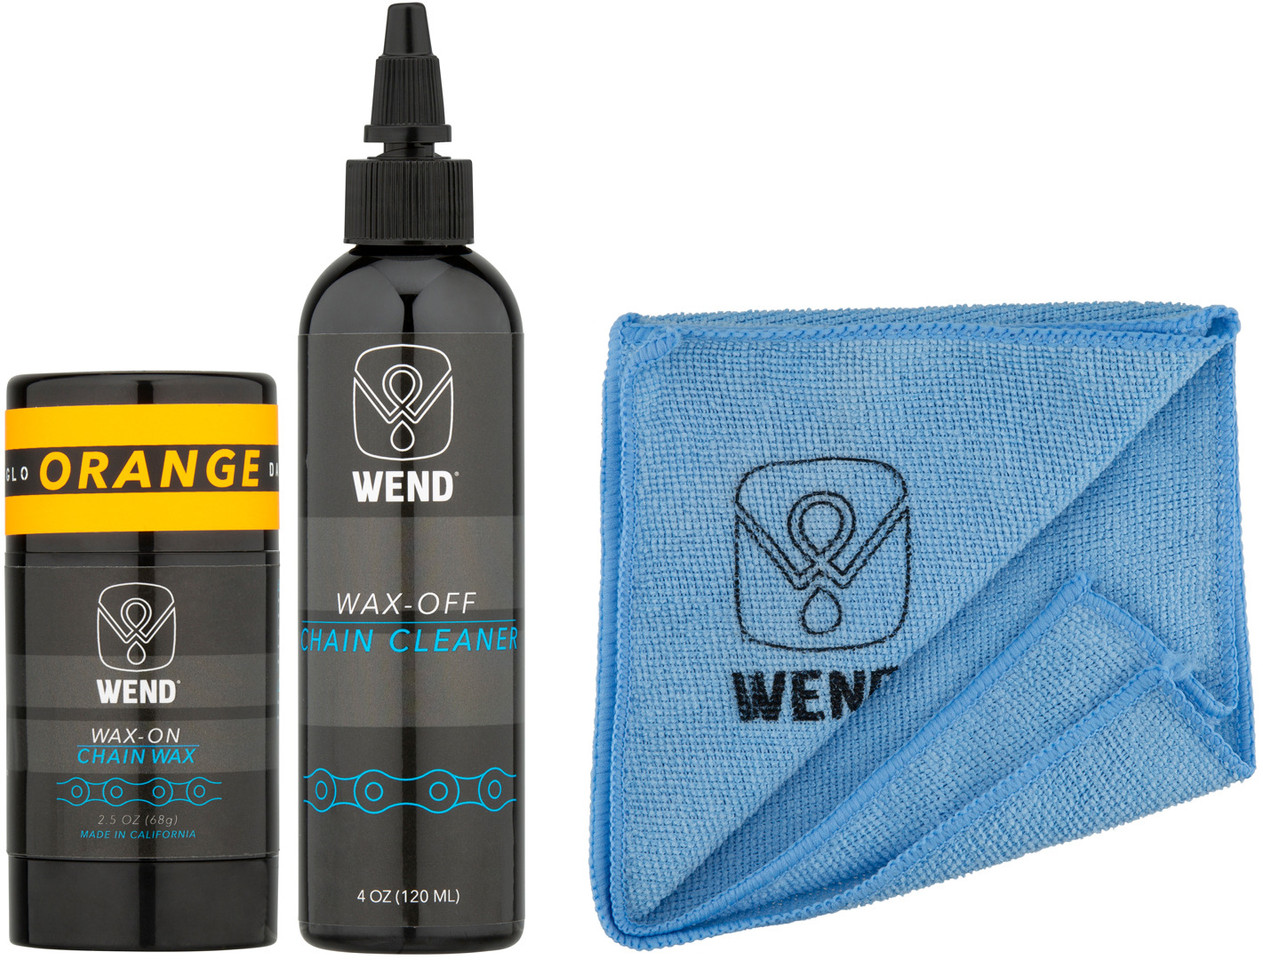 Wend Wax-On Chain Lube (Blue) (2.5oz) - Performance Bicycle